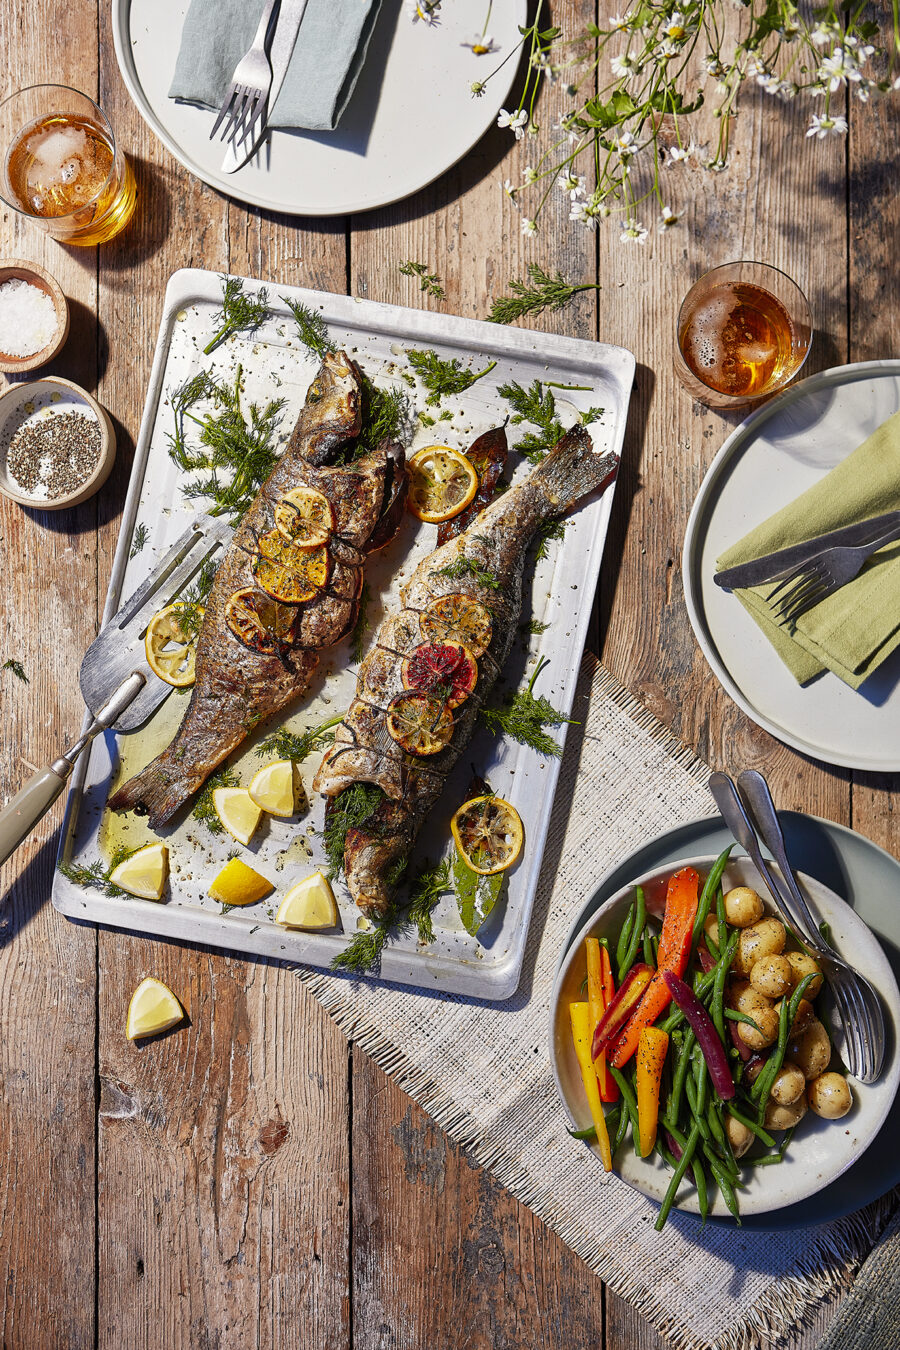 Celebrate National BBQ Week in style with Dobbies